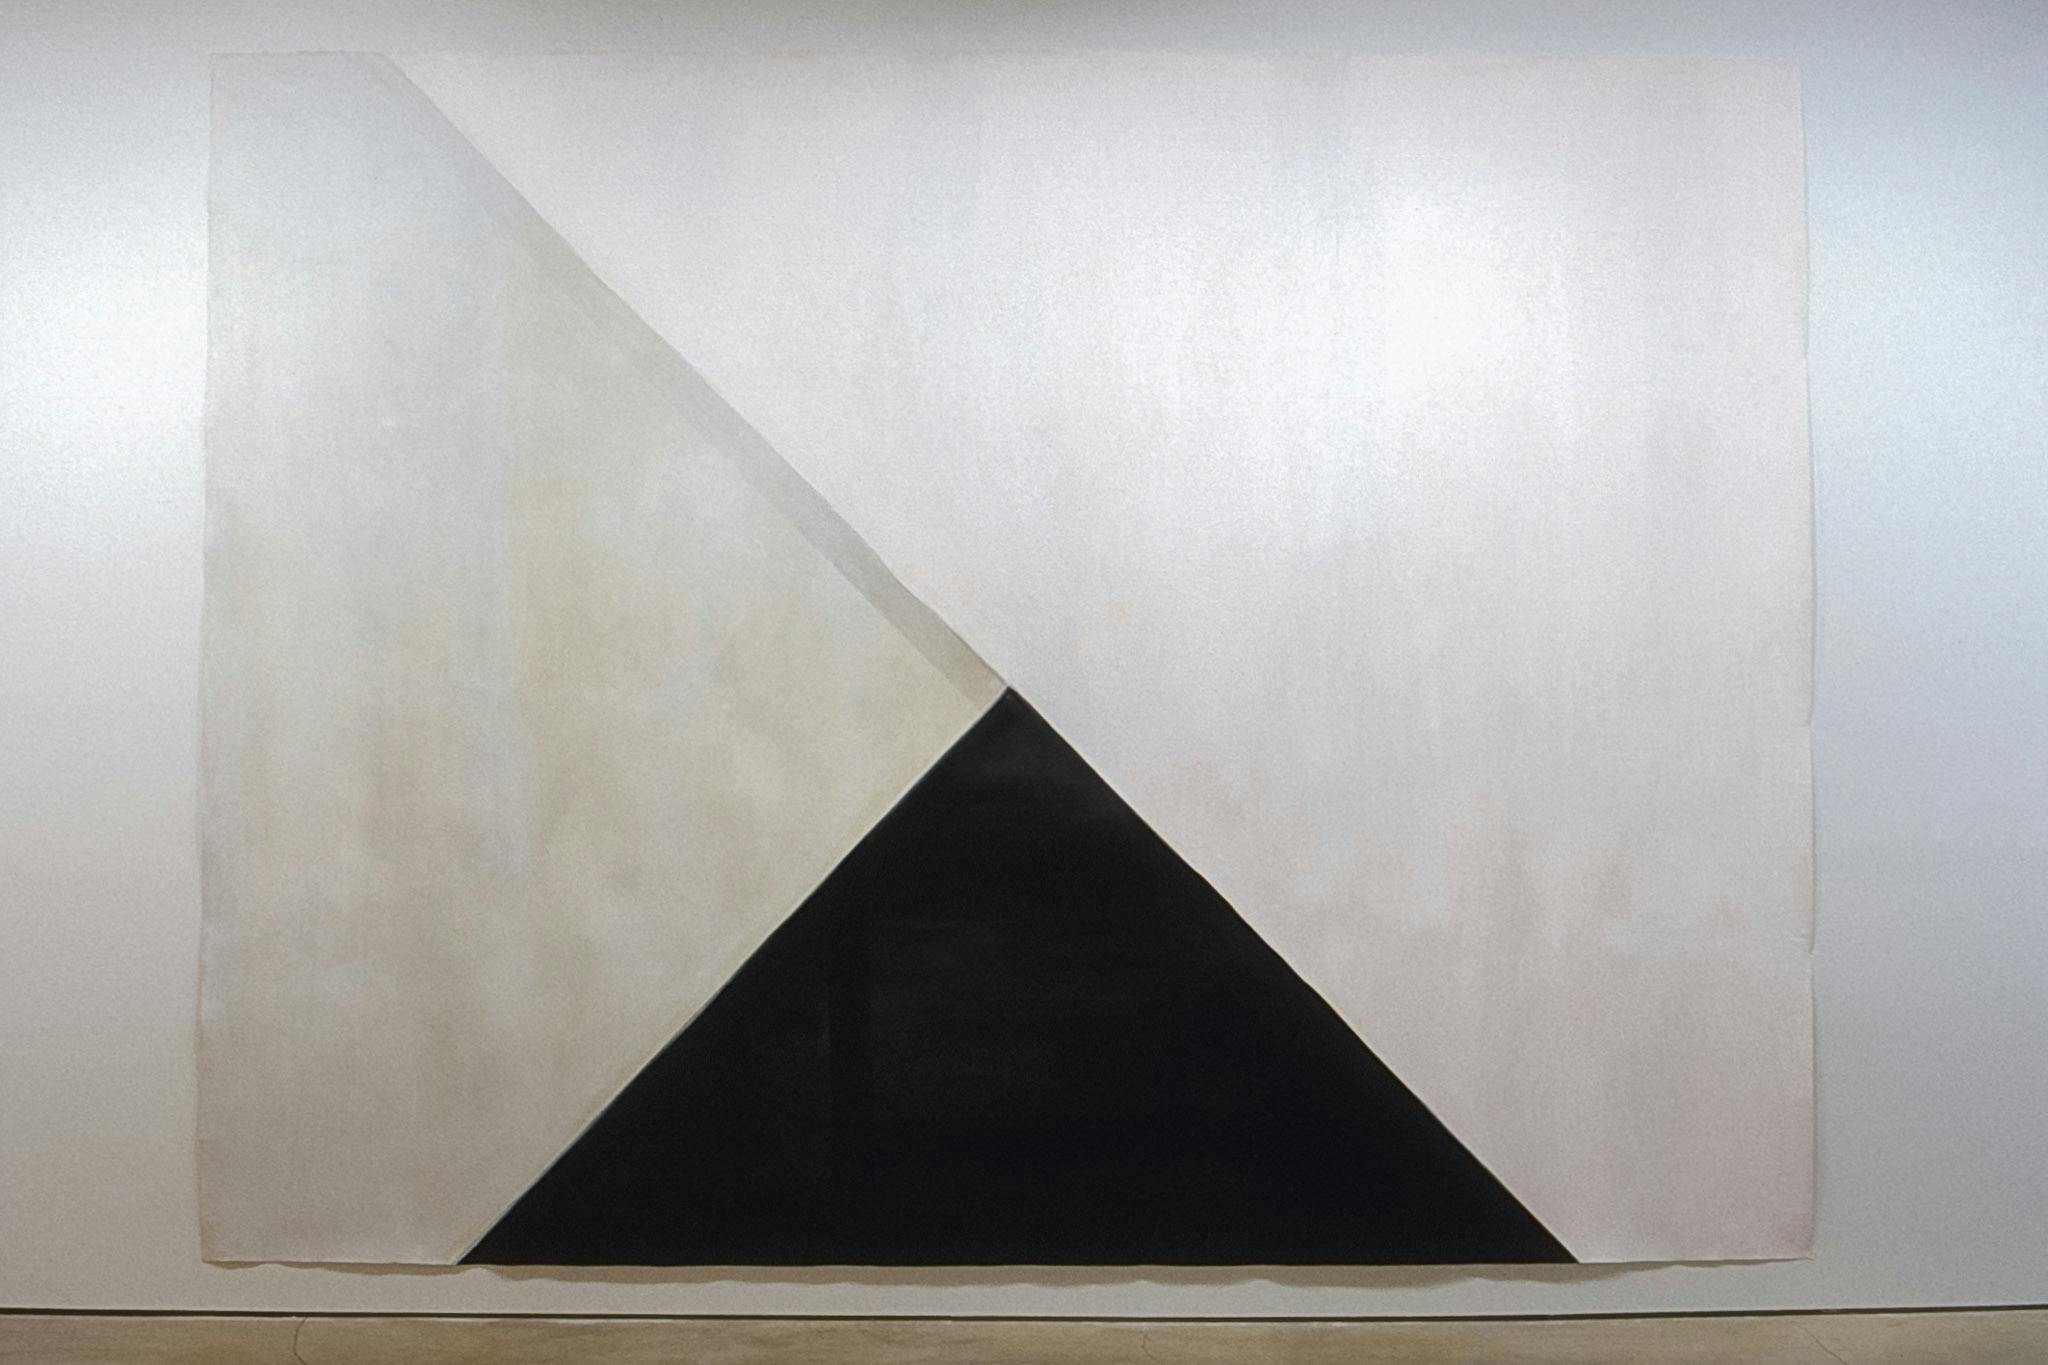 A large painting is installed on a gallery wall. It contains three geometric shapes: above the black triangle at the bottom, two white trapezoids are placed partially overlapping with each other. 